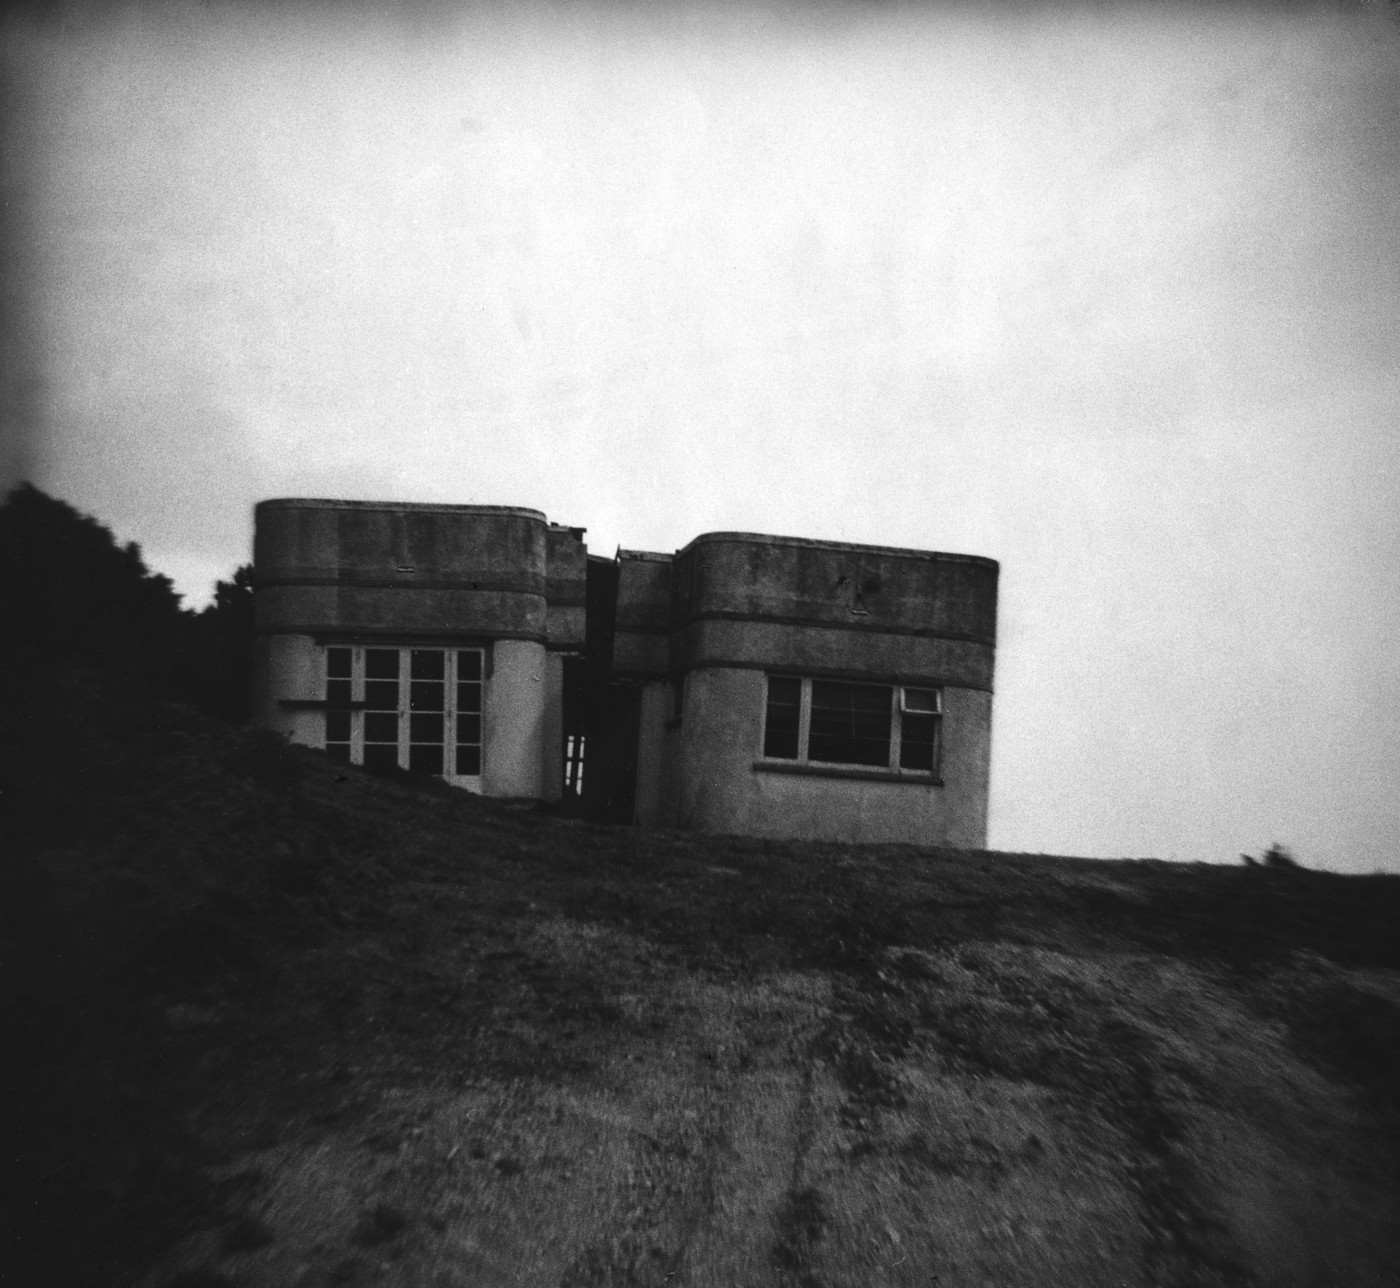 Image: Peter Peryer, The Divided House, 1975. Courtesy of the Estate of Peter Peryer